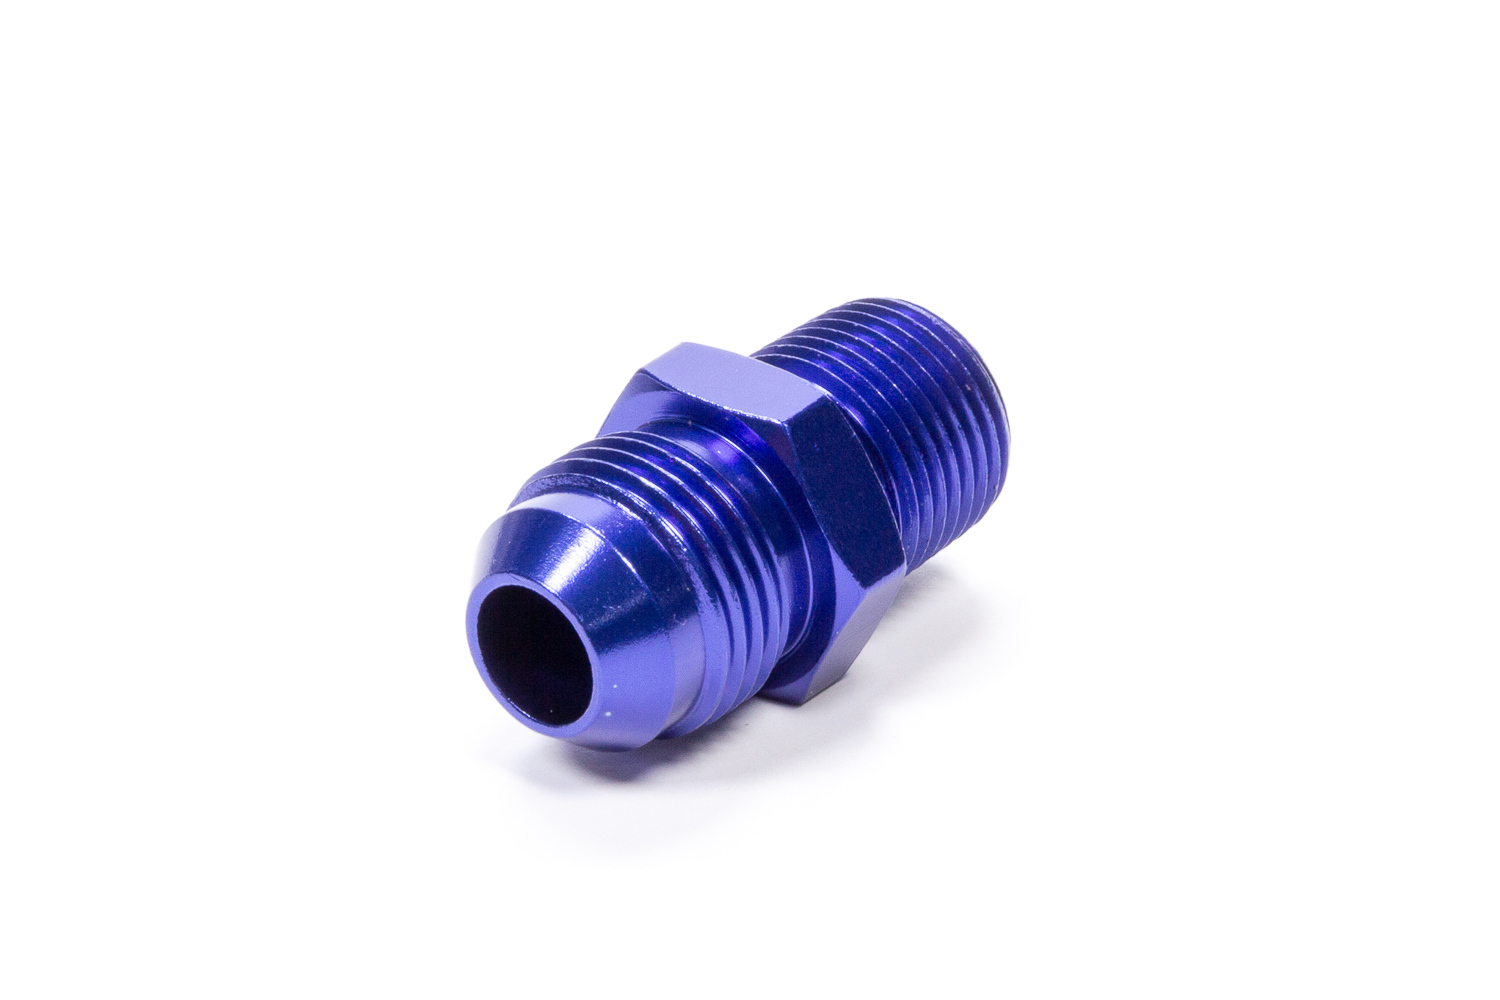 Fragola 481607 - Straight Adapter Fitting #8 x 1/4 MPT